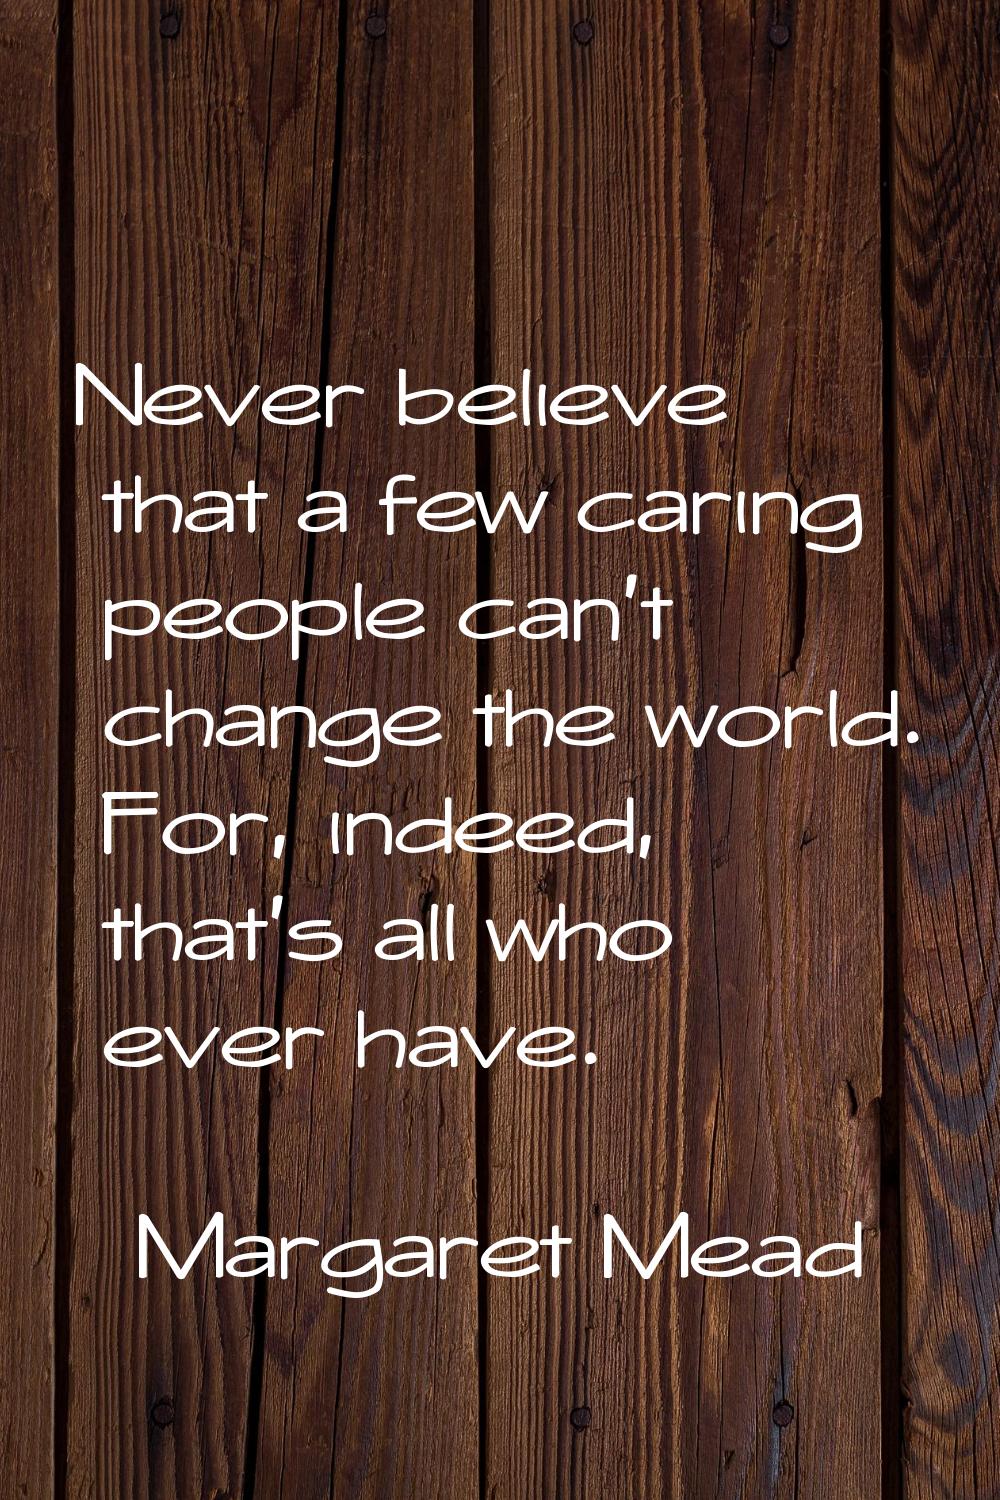 Never believe that a few caring people can't change the world. For, indeed, that's all who ever hav